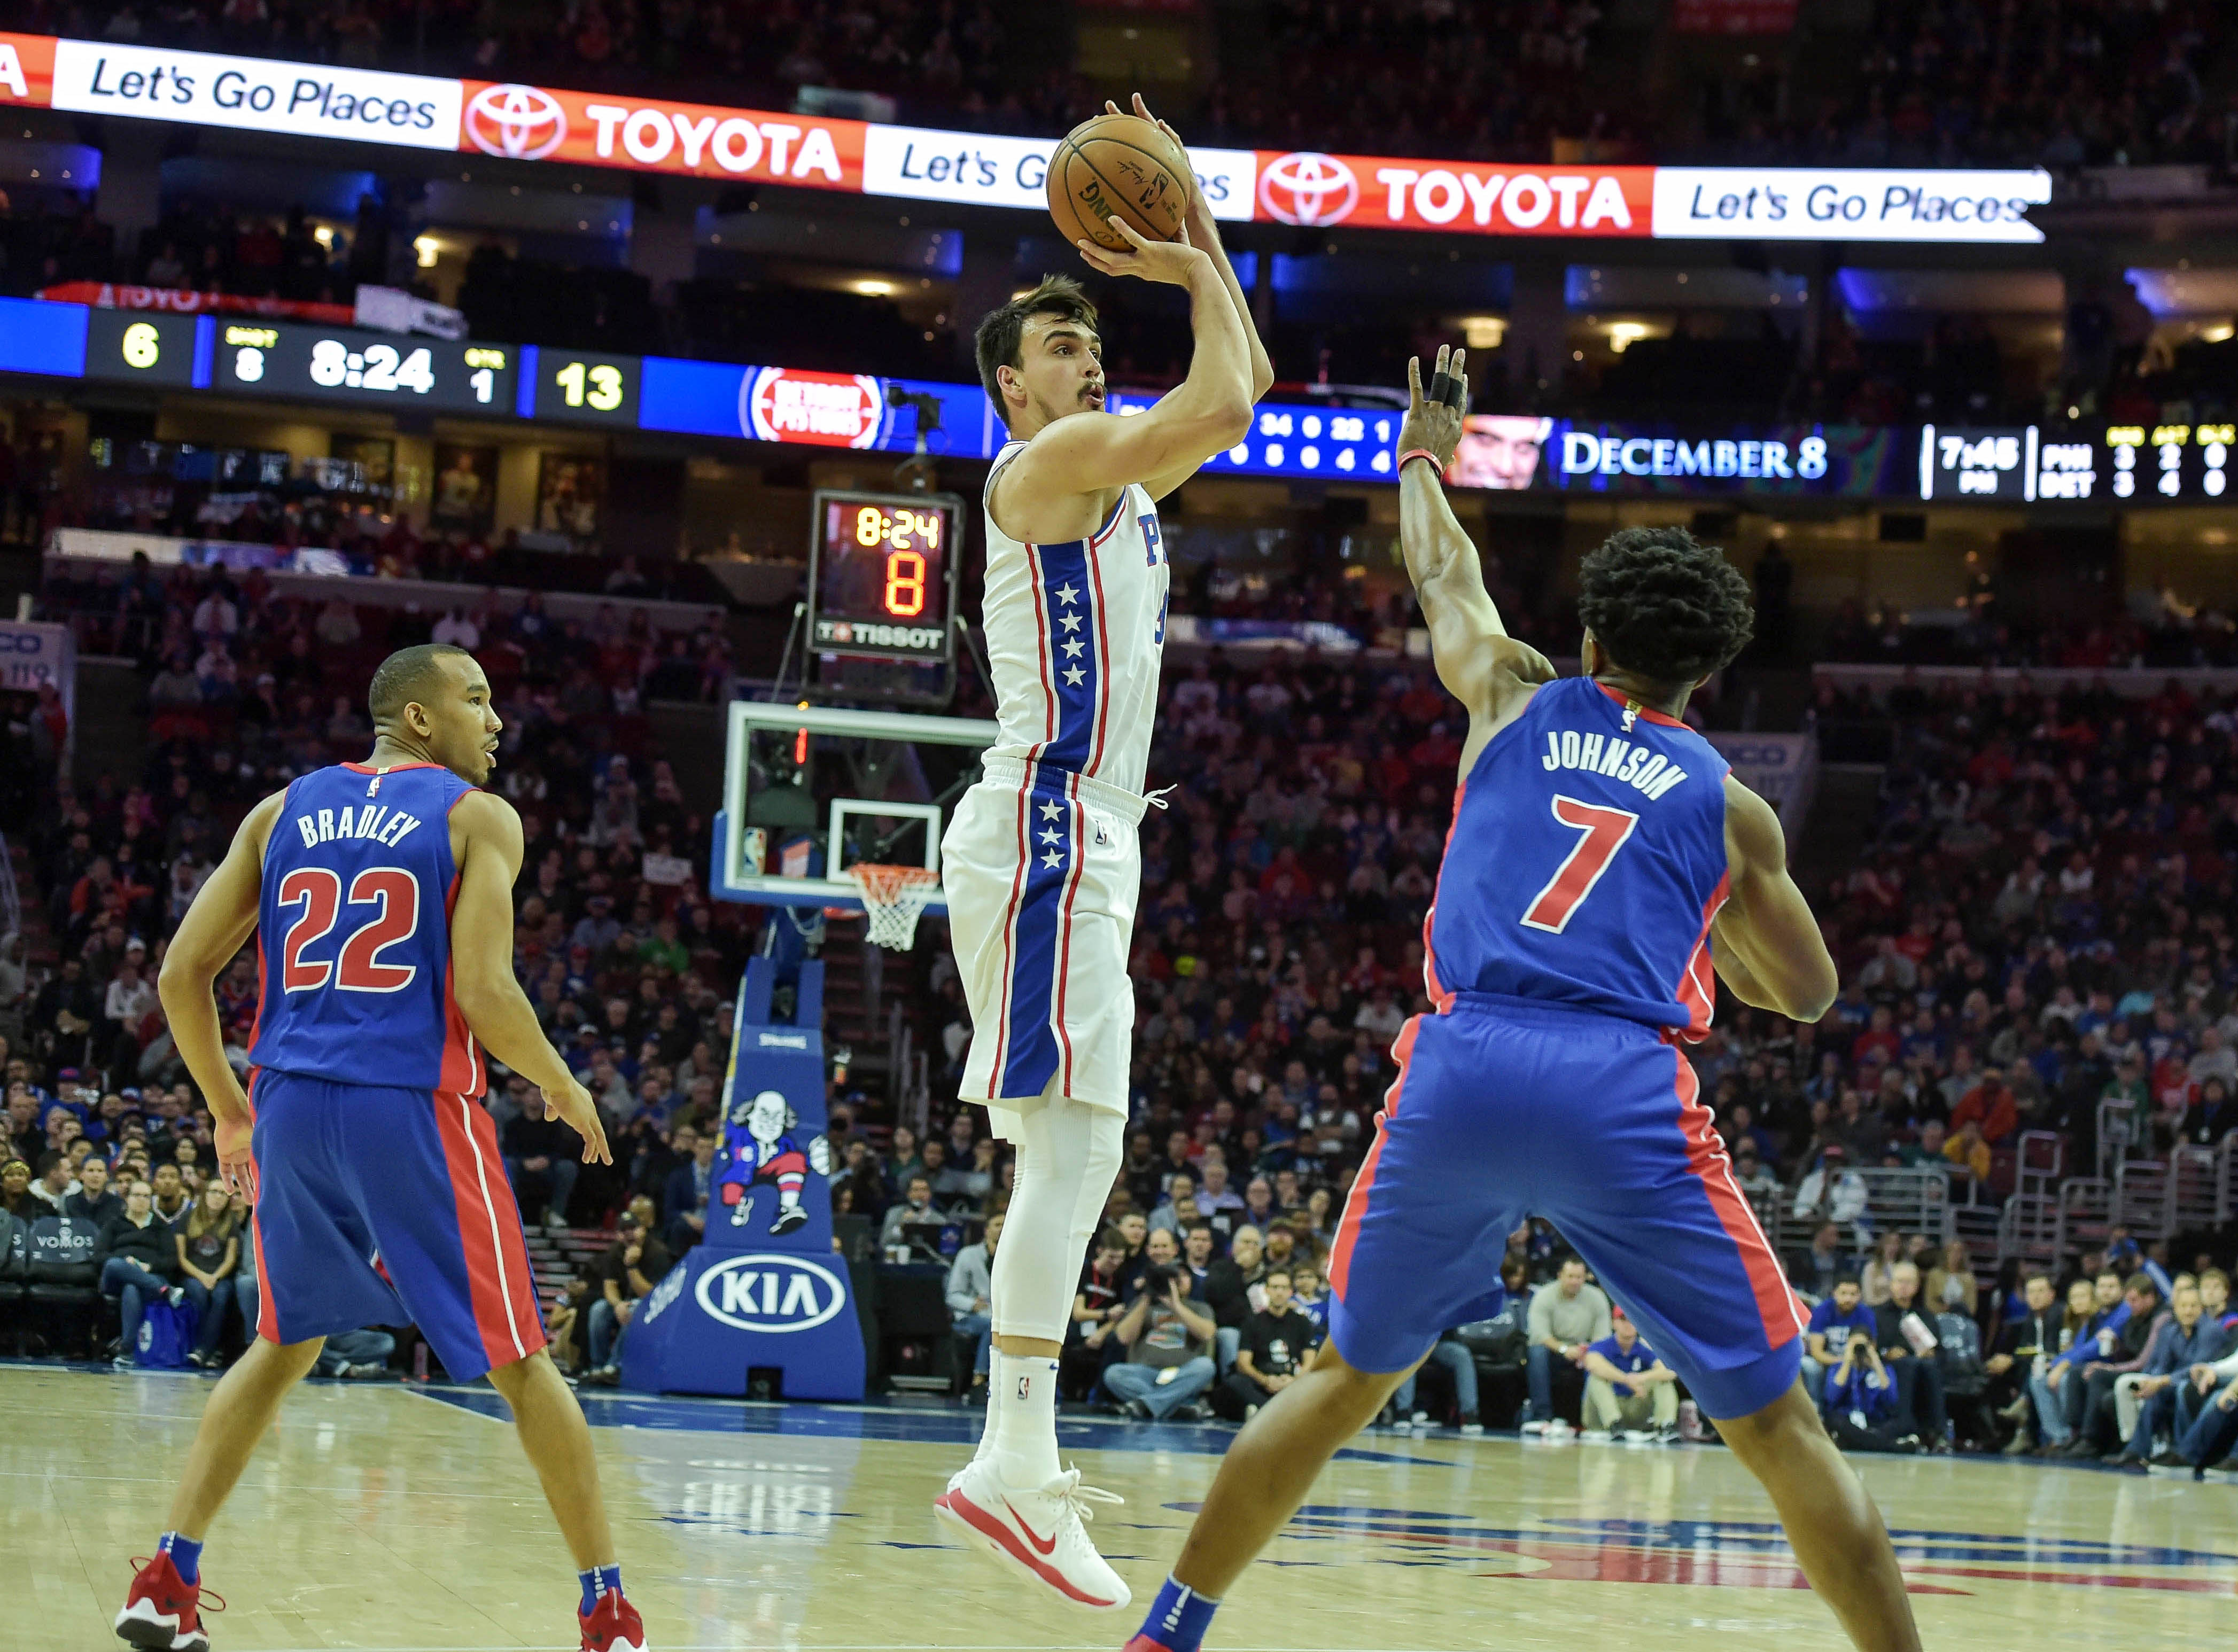 Sixers Notes: Stitches and Shoulders